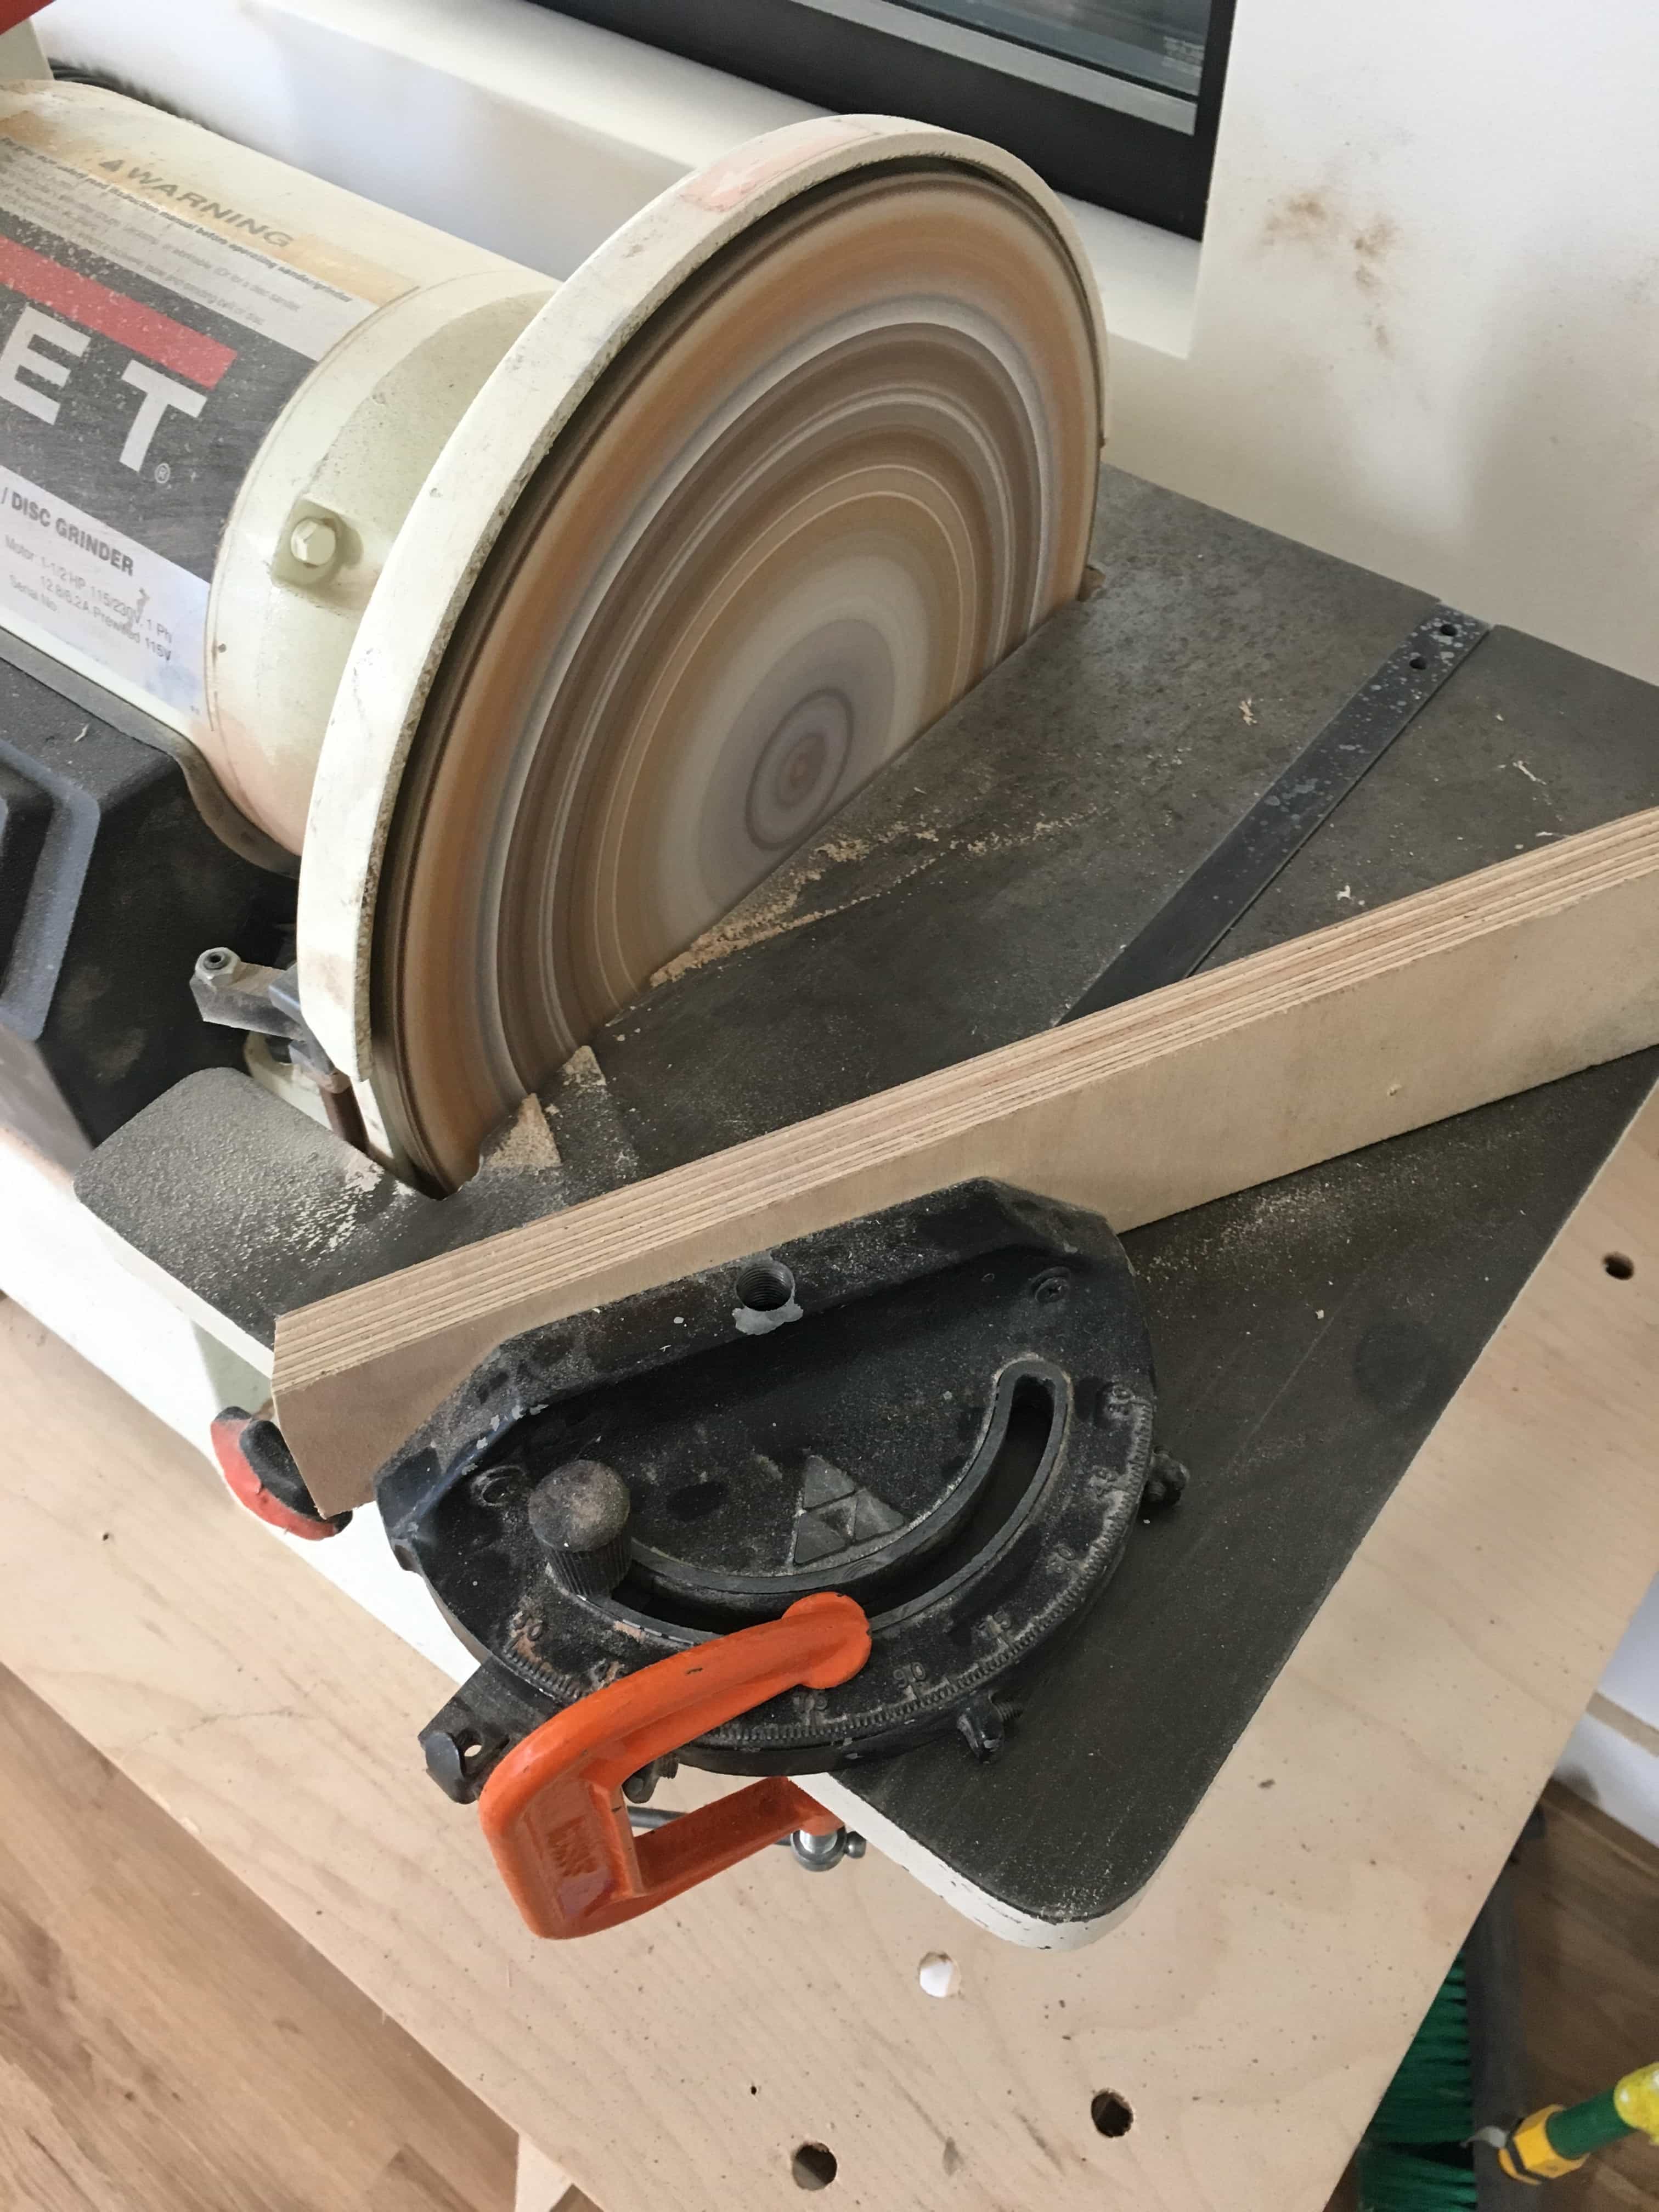 Jig lined up at an angle to sanding wheel.